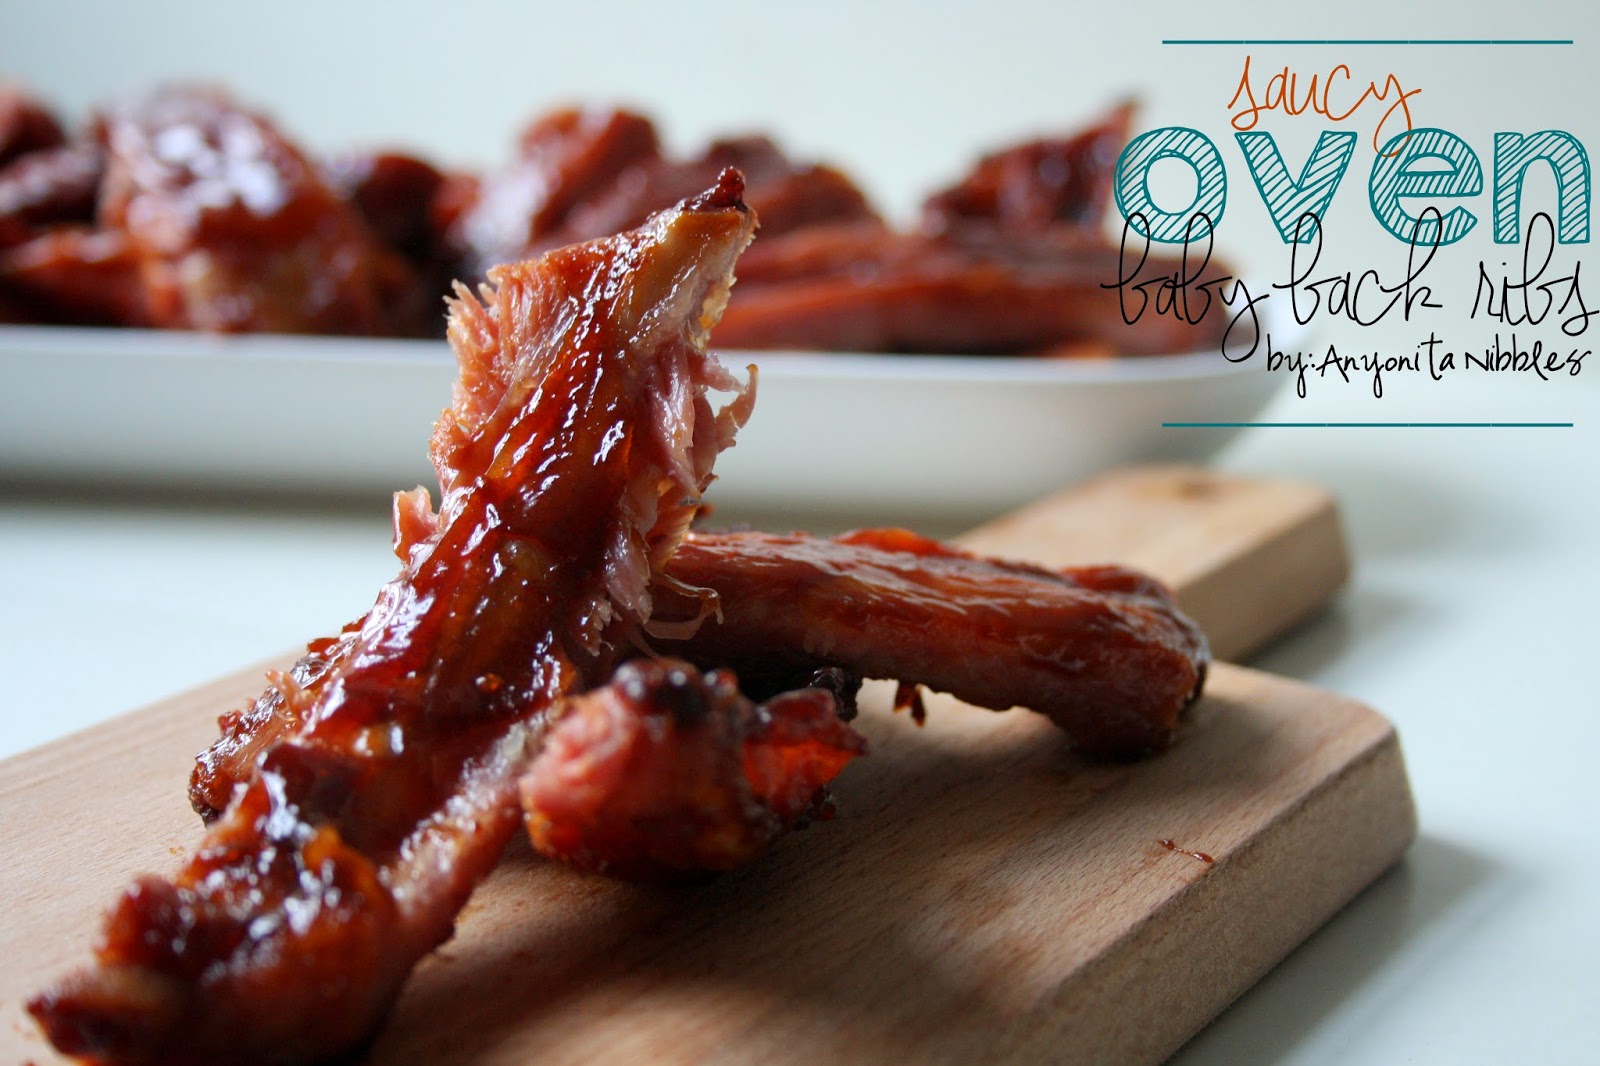 With these easy-to-make tender baby back ribs, you can have barbecue ribs any time! | Anyonita Nibbles